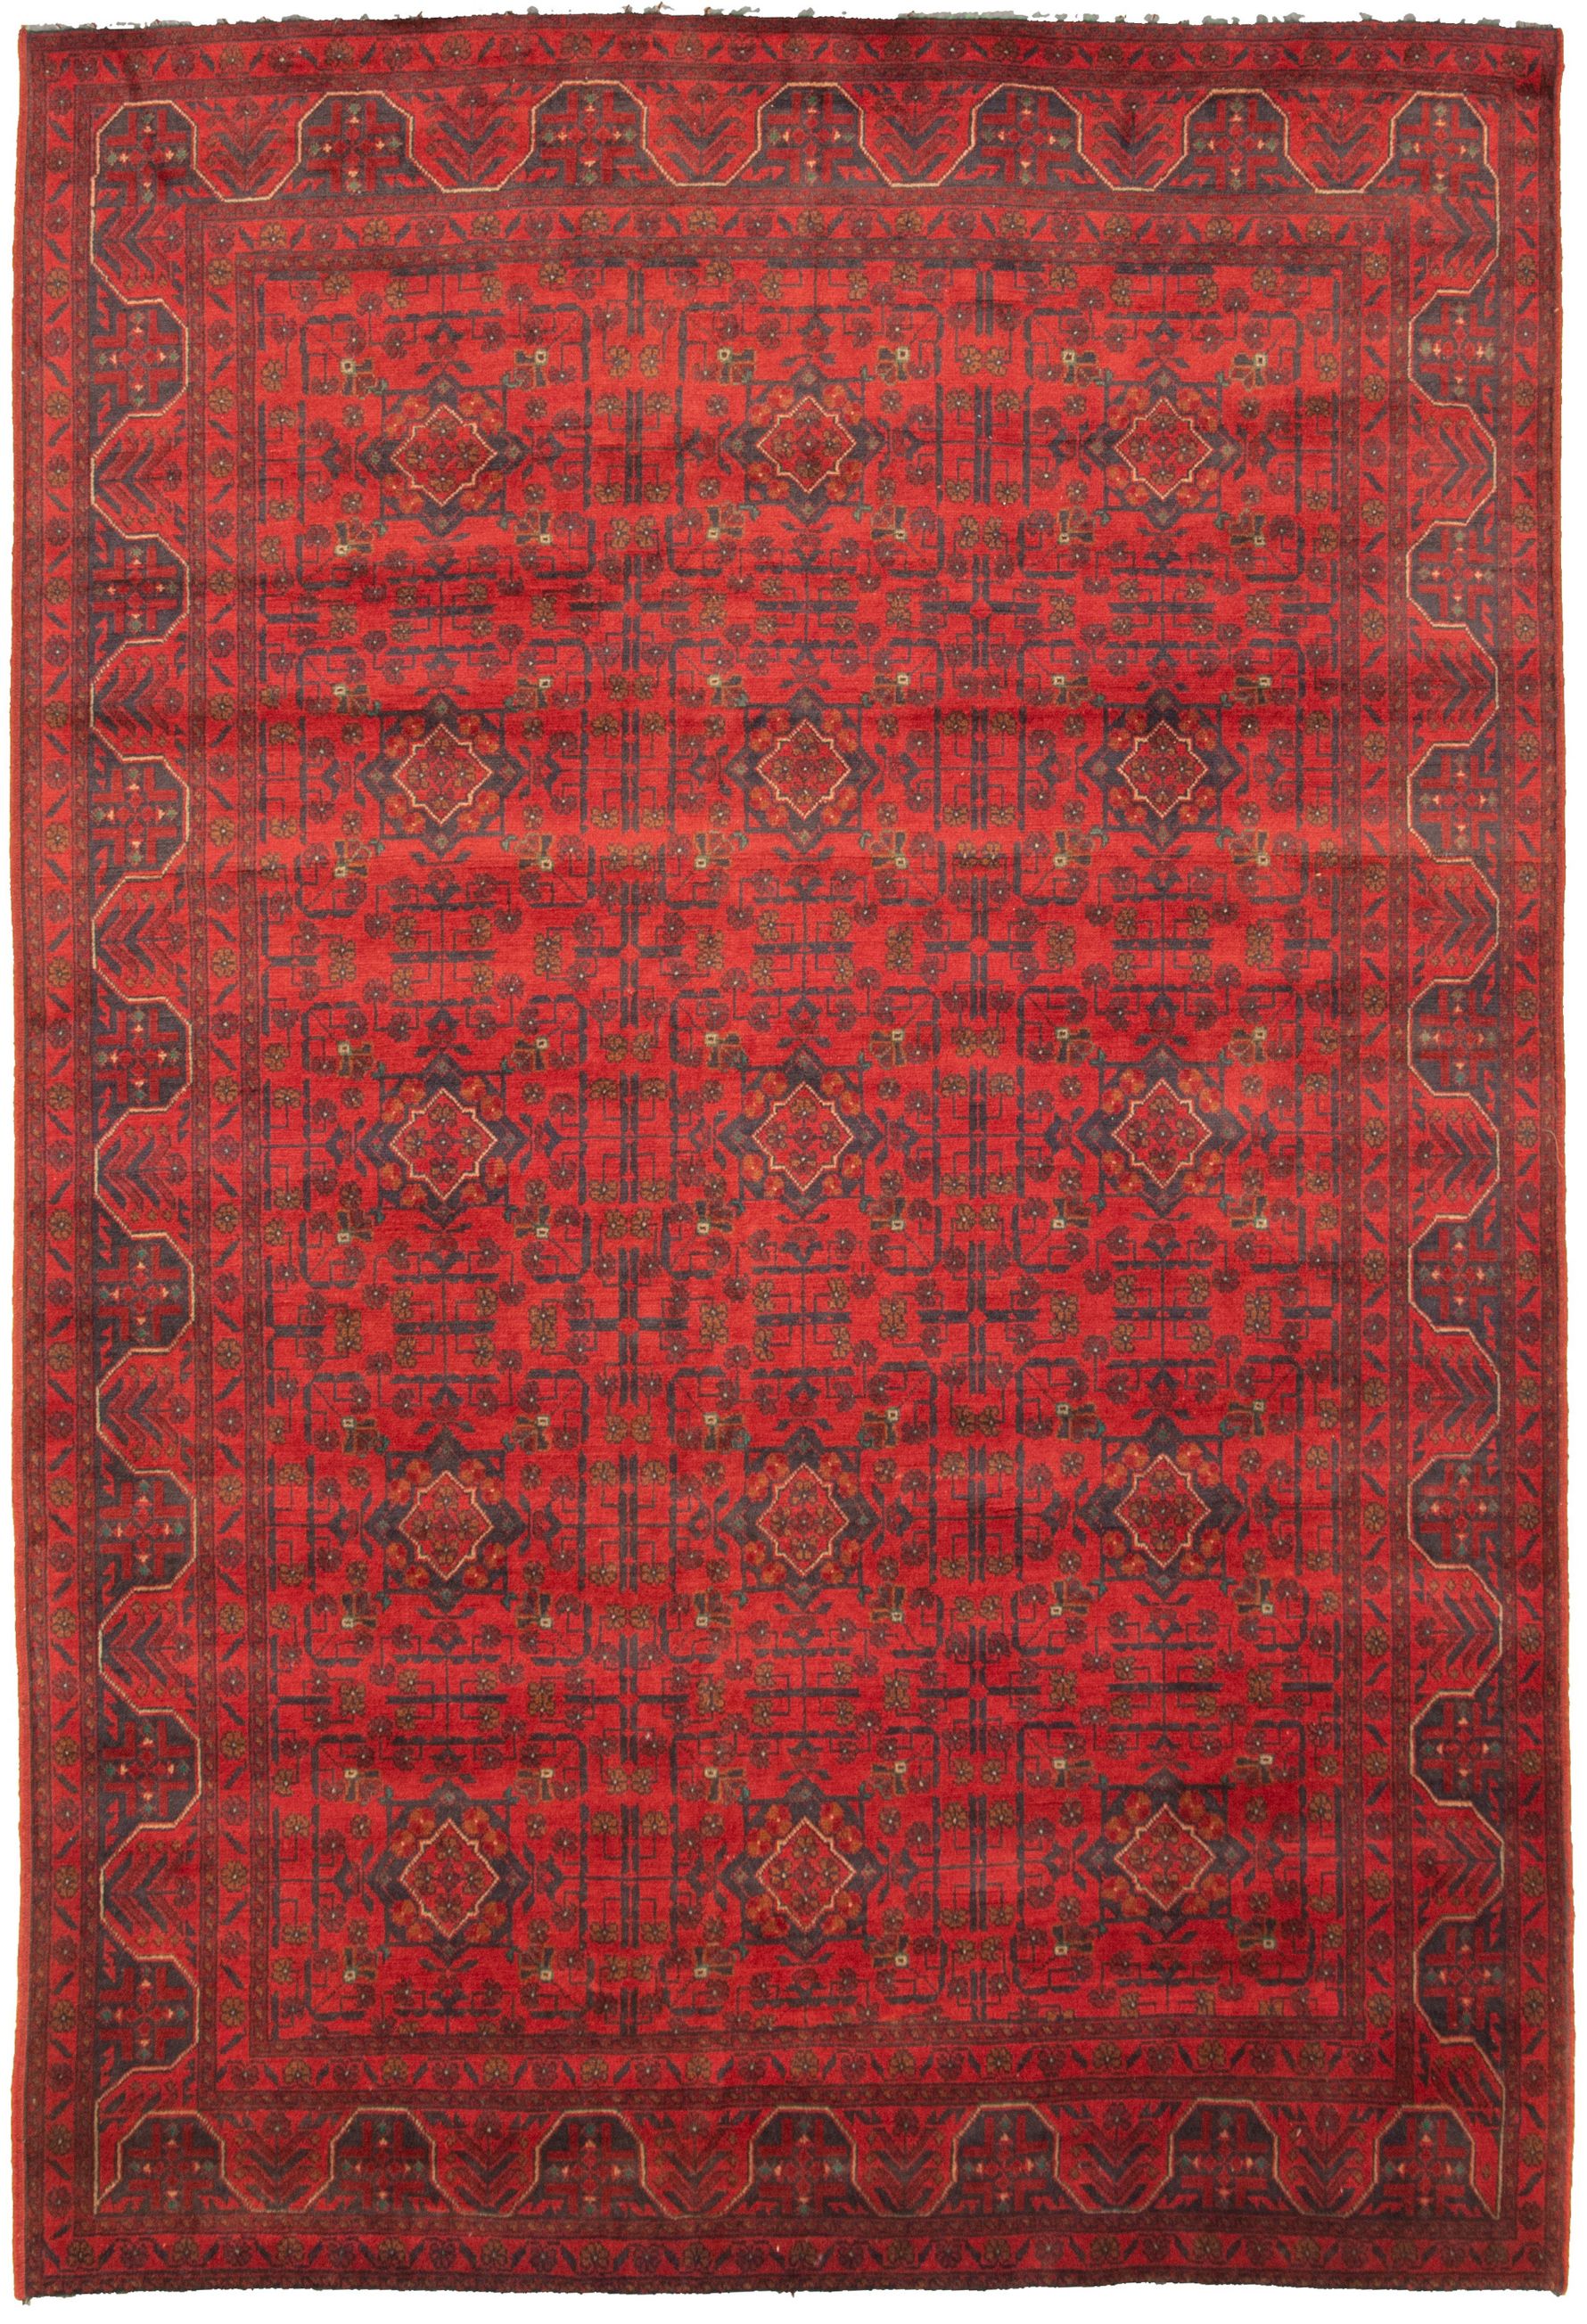 Hand-knotted Finest Khal Mohammadi Red  Rug 6'6" x 9'9"  Size: 6'6" x 9'9"  